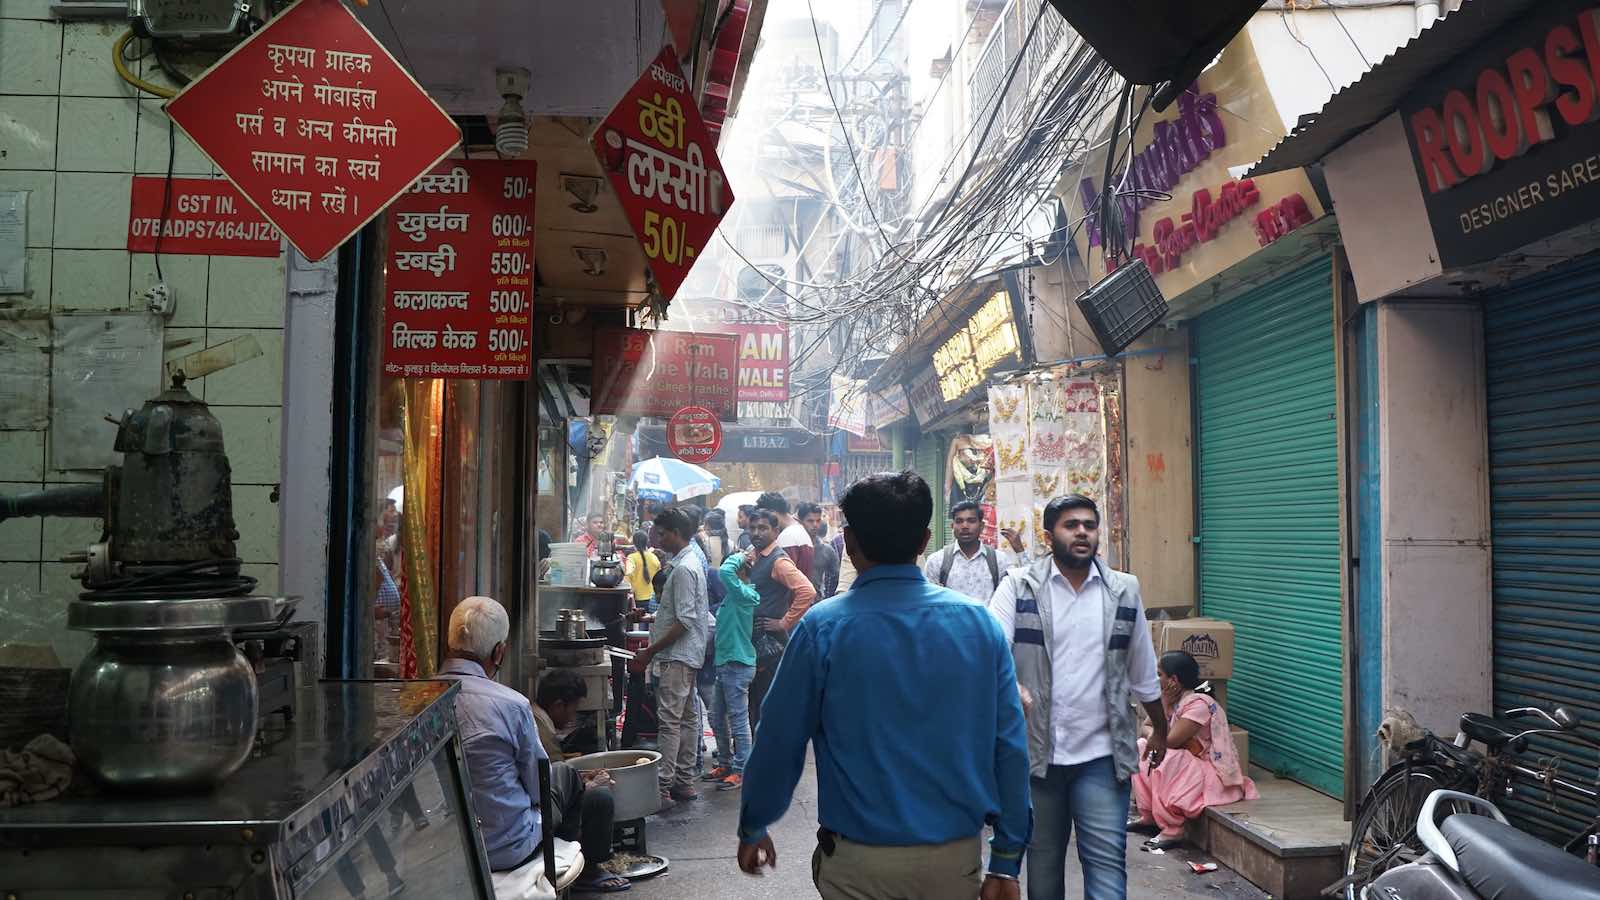 A small alleyway in Old Delhi that I was exploring. Again there were shops, street food stands, and an incredible weave of electricity wiring overhead.